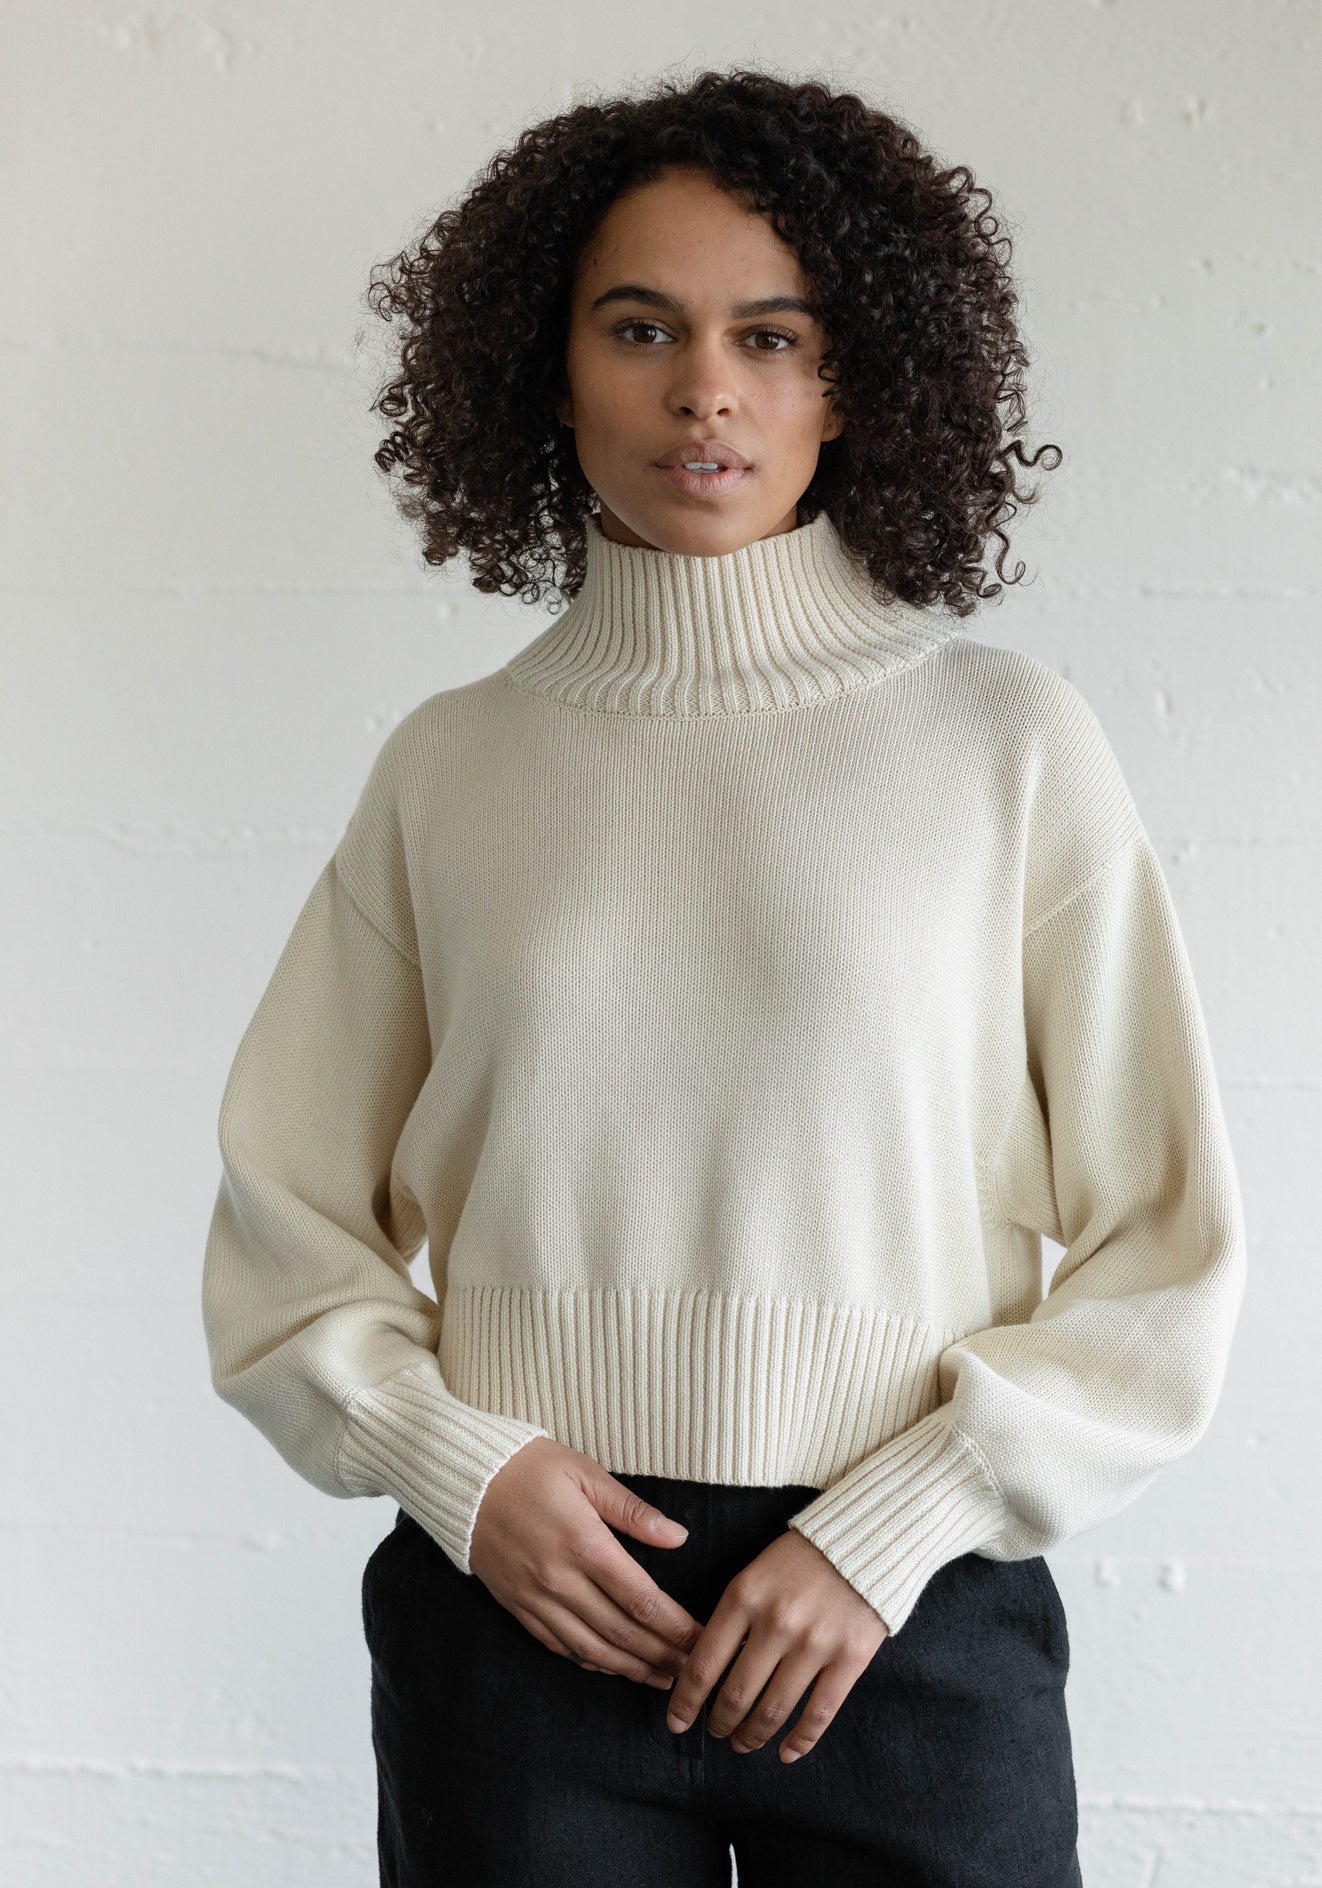 The perfect cropped mid weight cover up or layering piece to style with your favorite high rise bottoms. Made with 100% organic cotton in Peru.